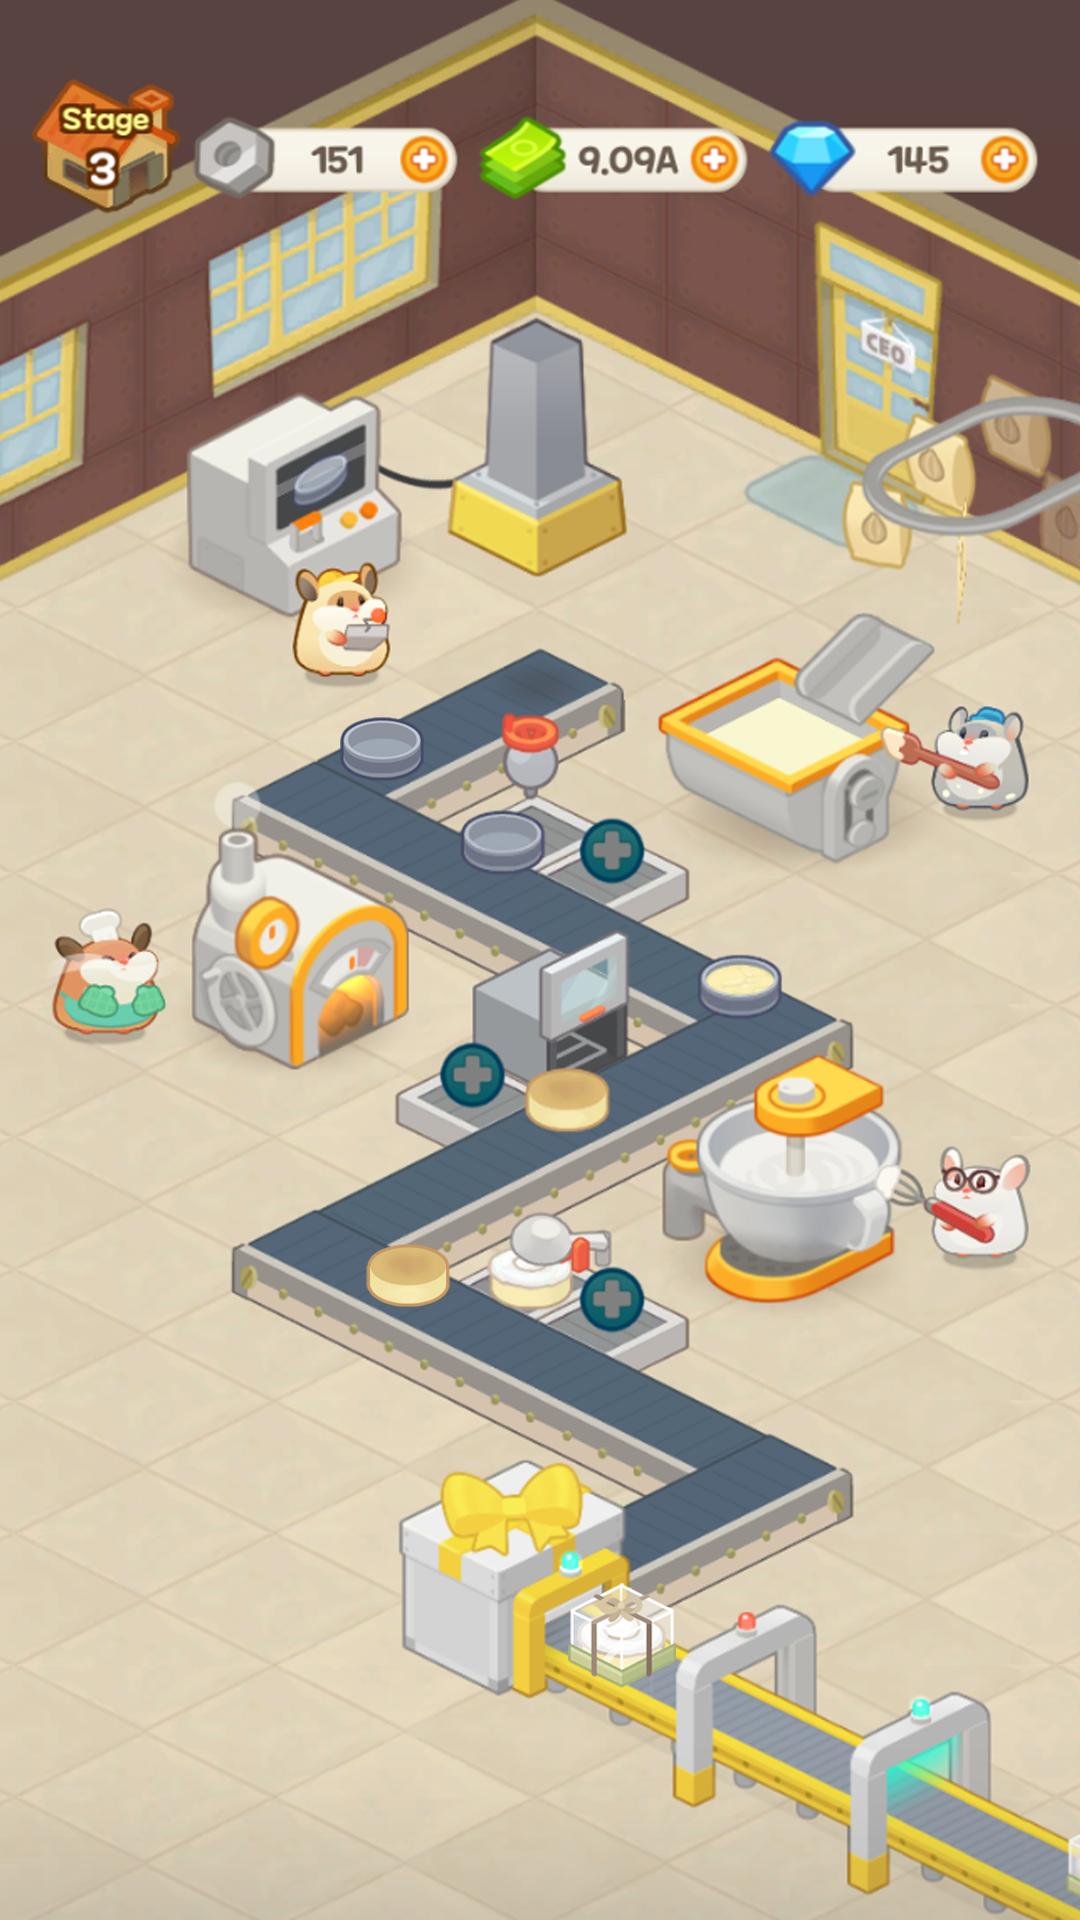 Hamster's Cake Factory - Idle Baking Manager 1.0.2 Screenshot 21